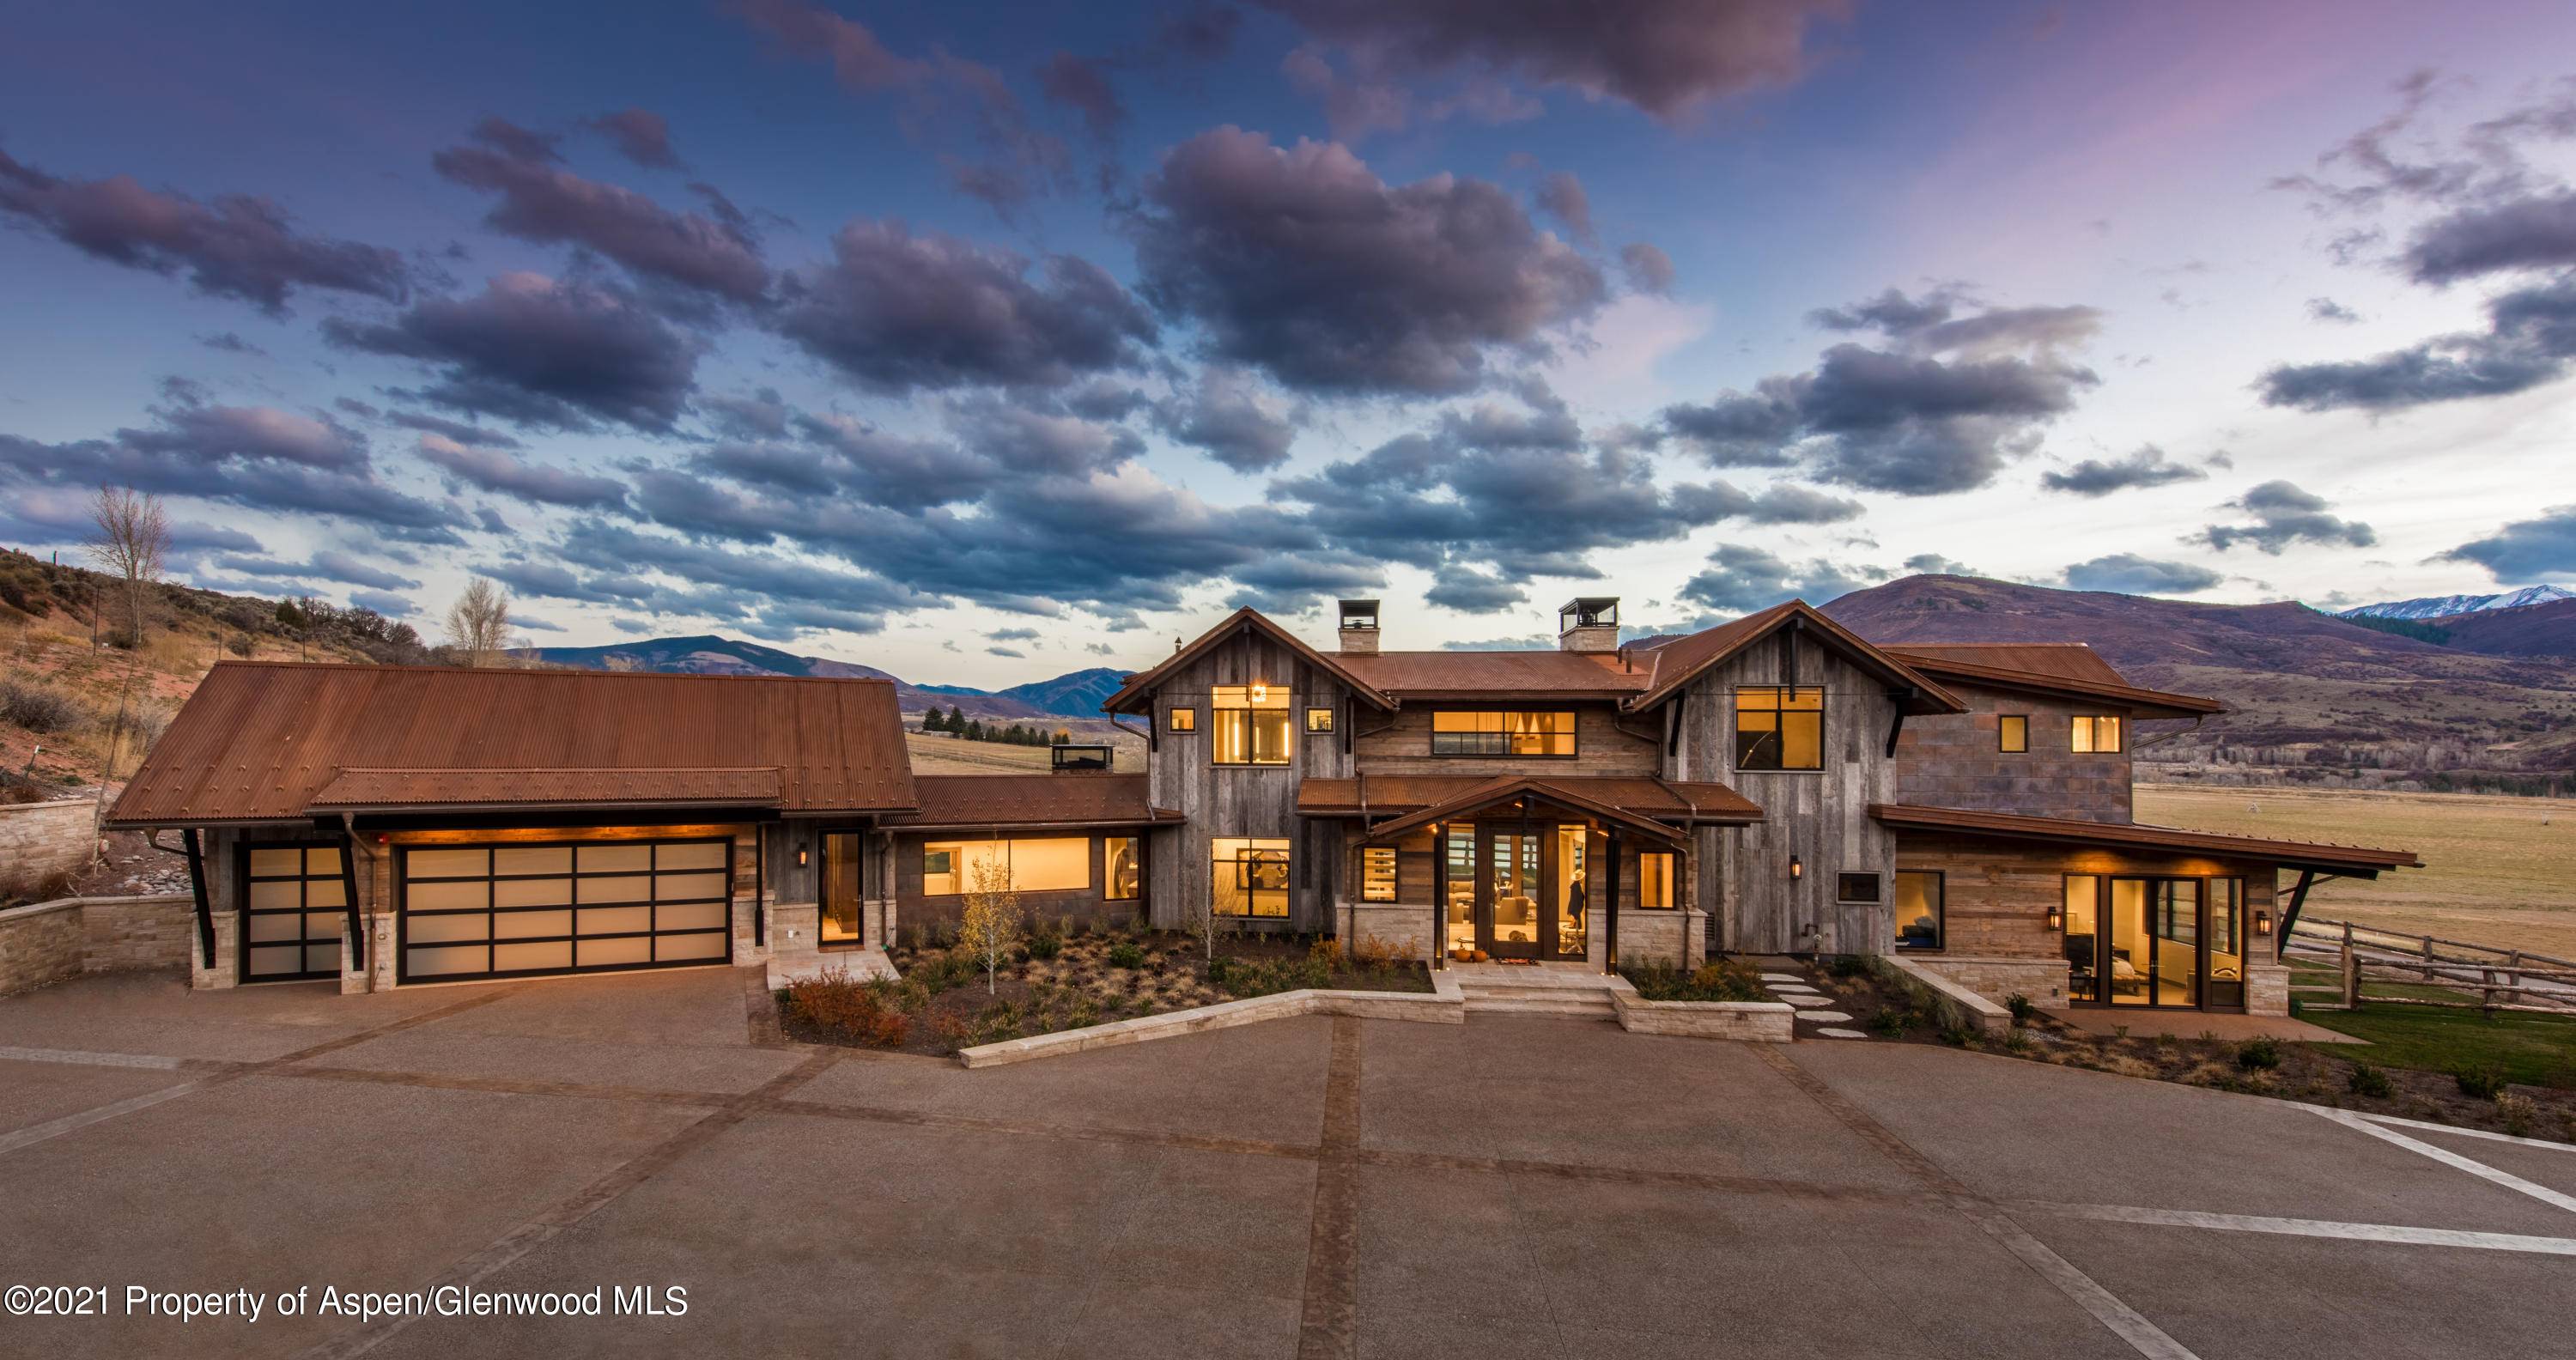 Aspen Valley Ranch is Aspen's only whole ownership private luxury serviced community.